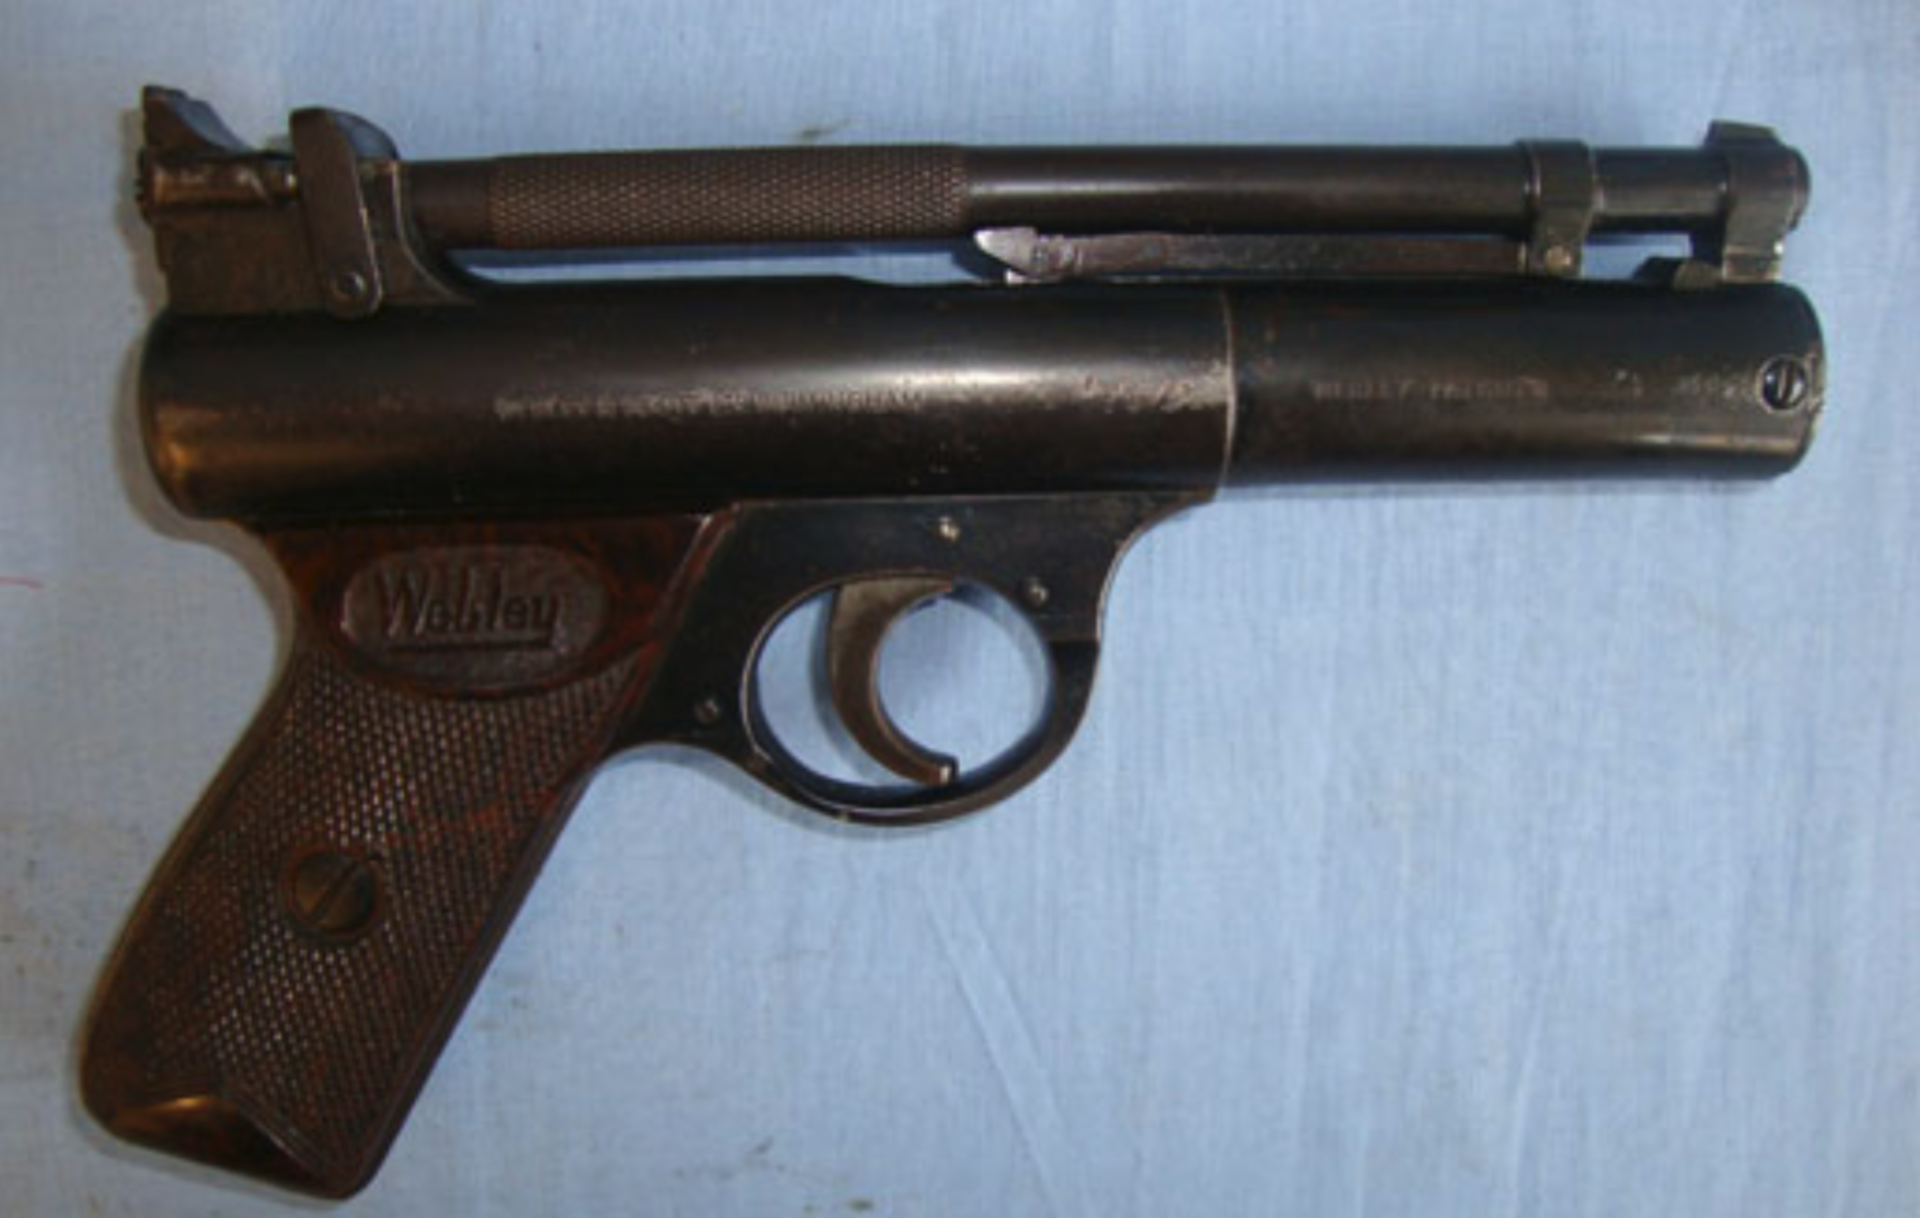 Boxed, Post 1958, Webley Senior .22 Calibre Air Pistol With Brown Grips. - Image 3 of 3